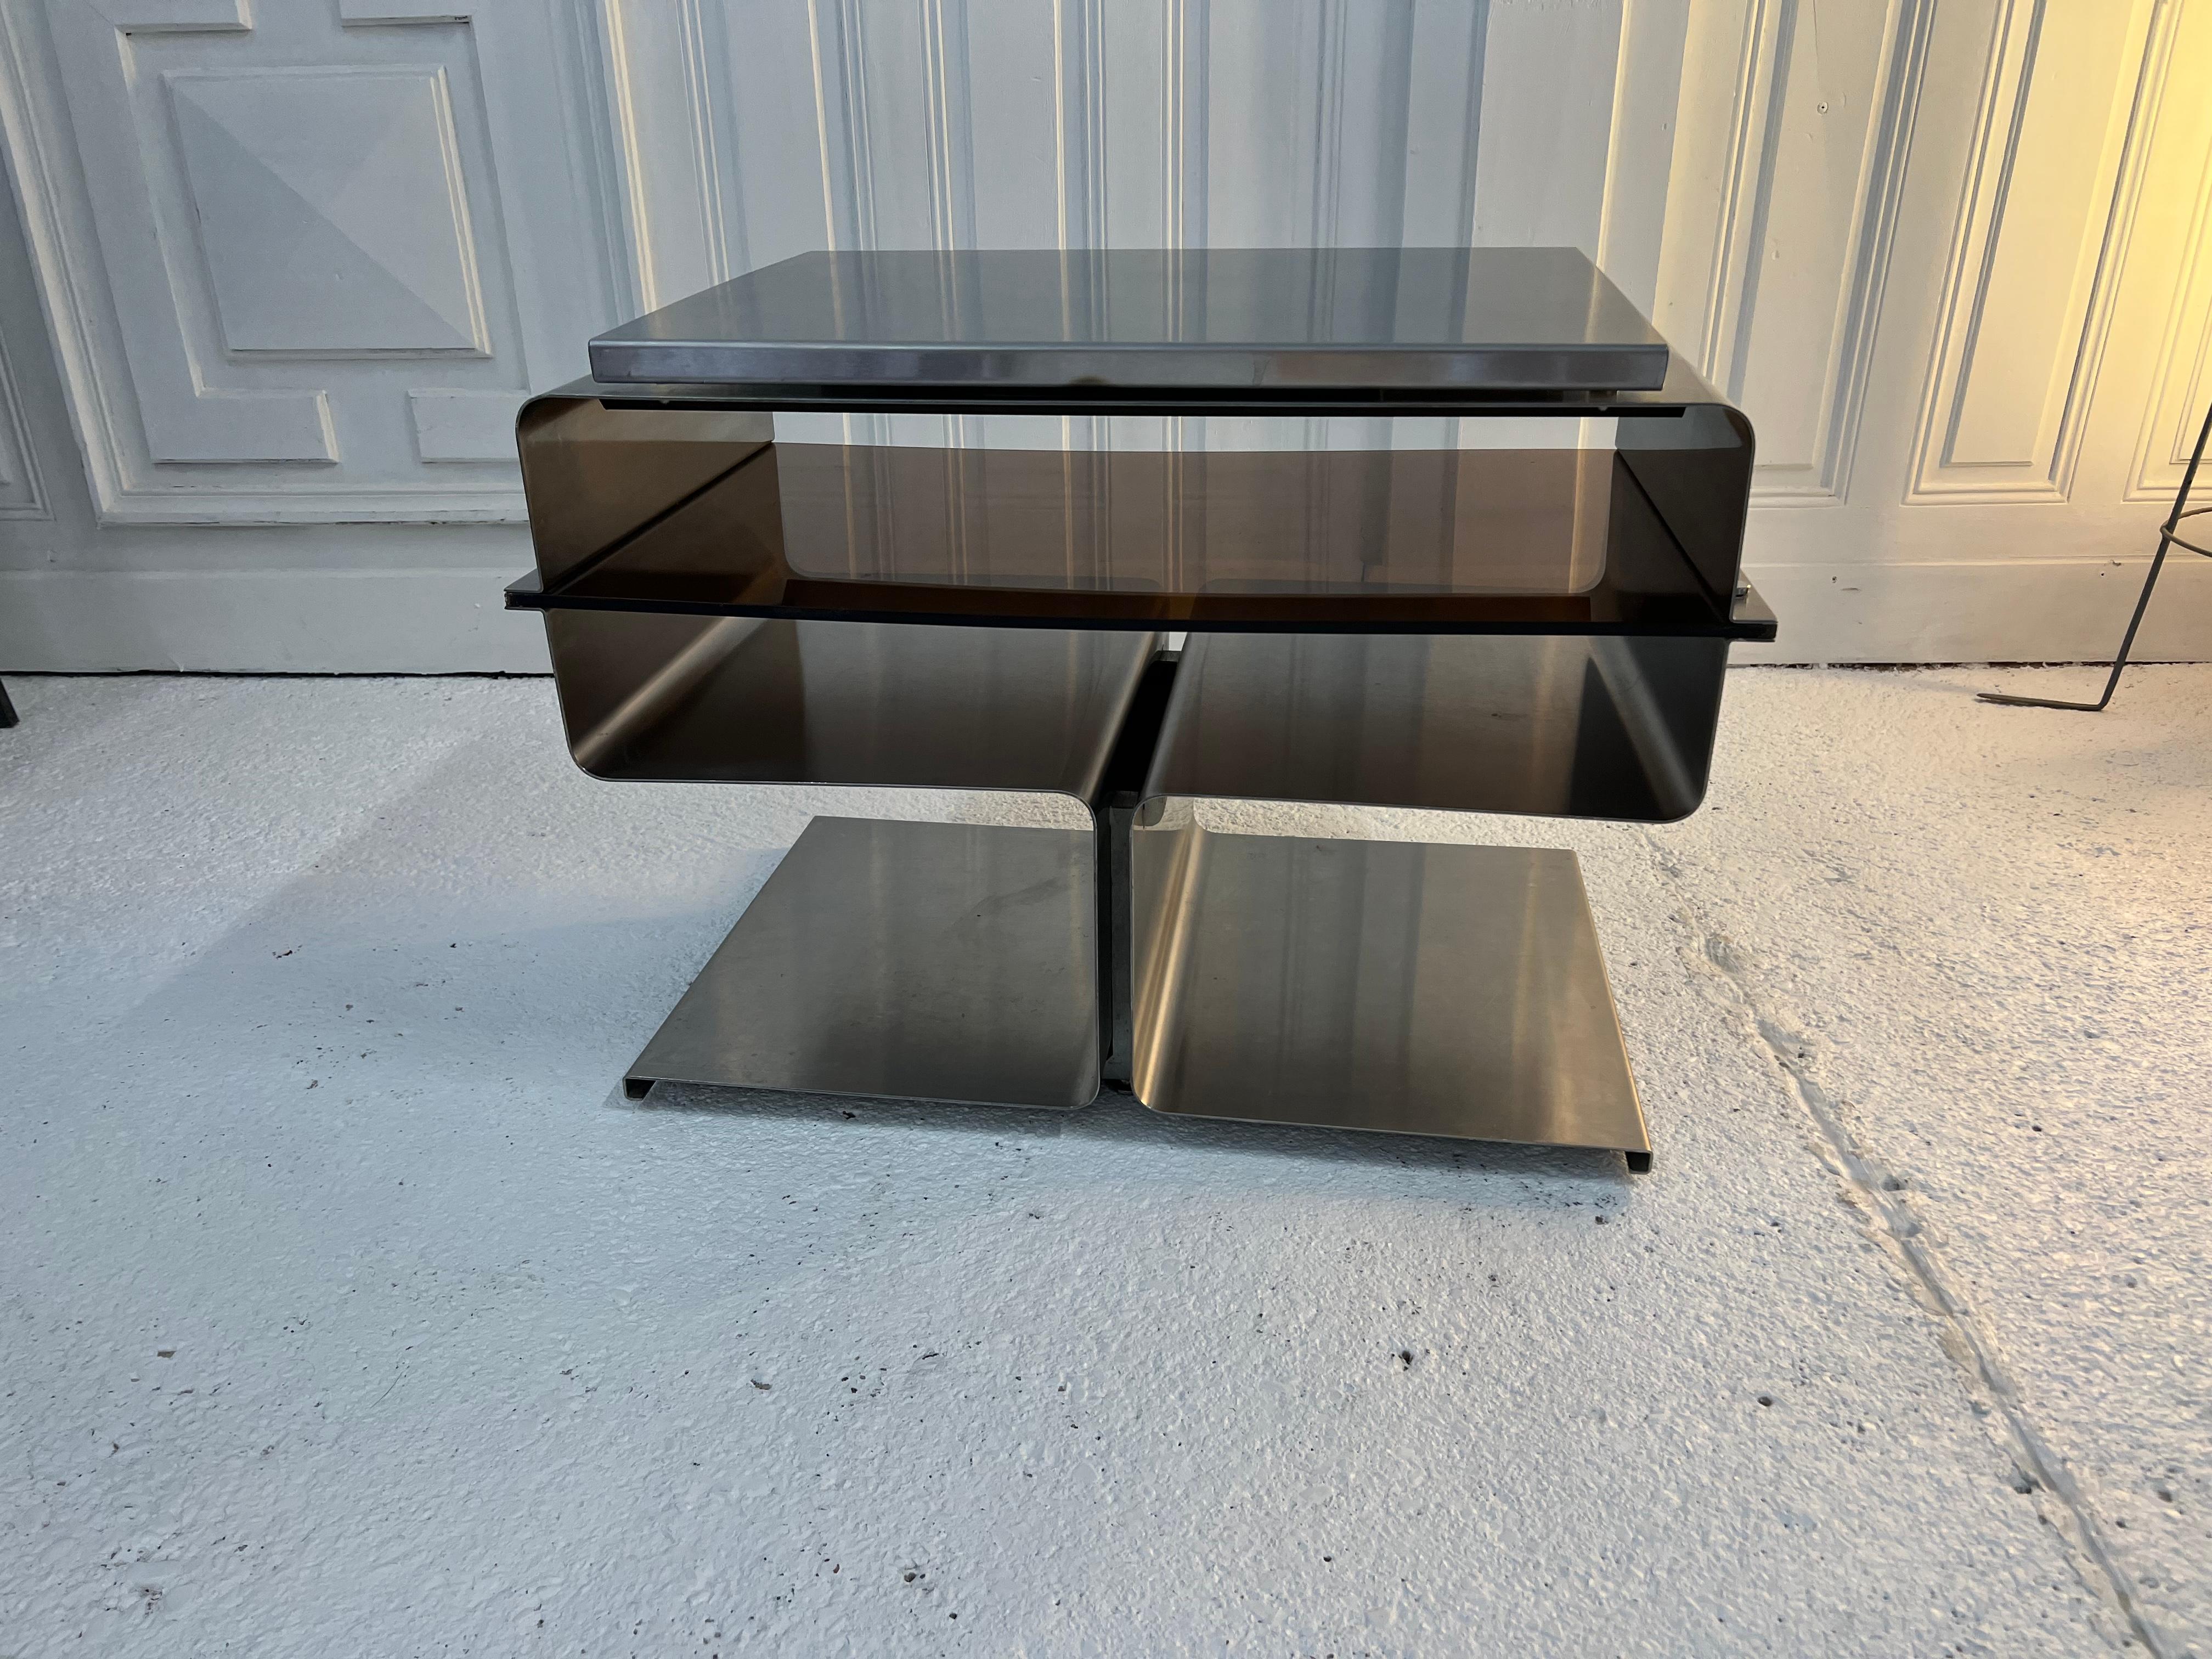 Nice coffee table by Francois Monnet édition Kappa France 
the first use was planned for a Hifi or tv chain

François Monnet is a French architect and designer. From 1968, he designed collections of steel furniture for Kappa, which have become